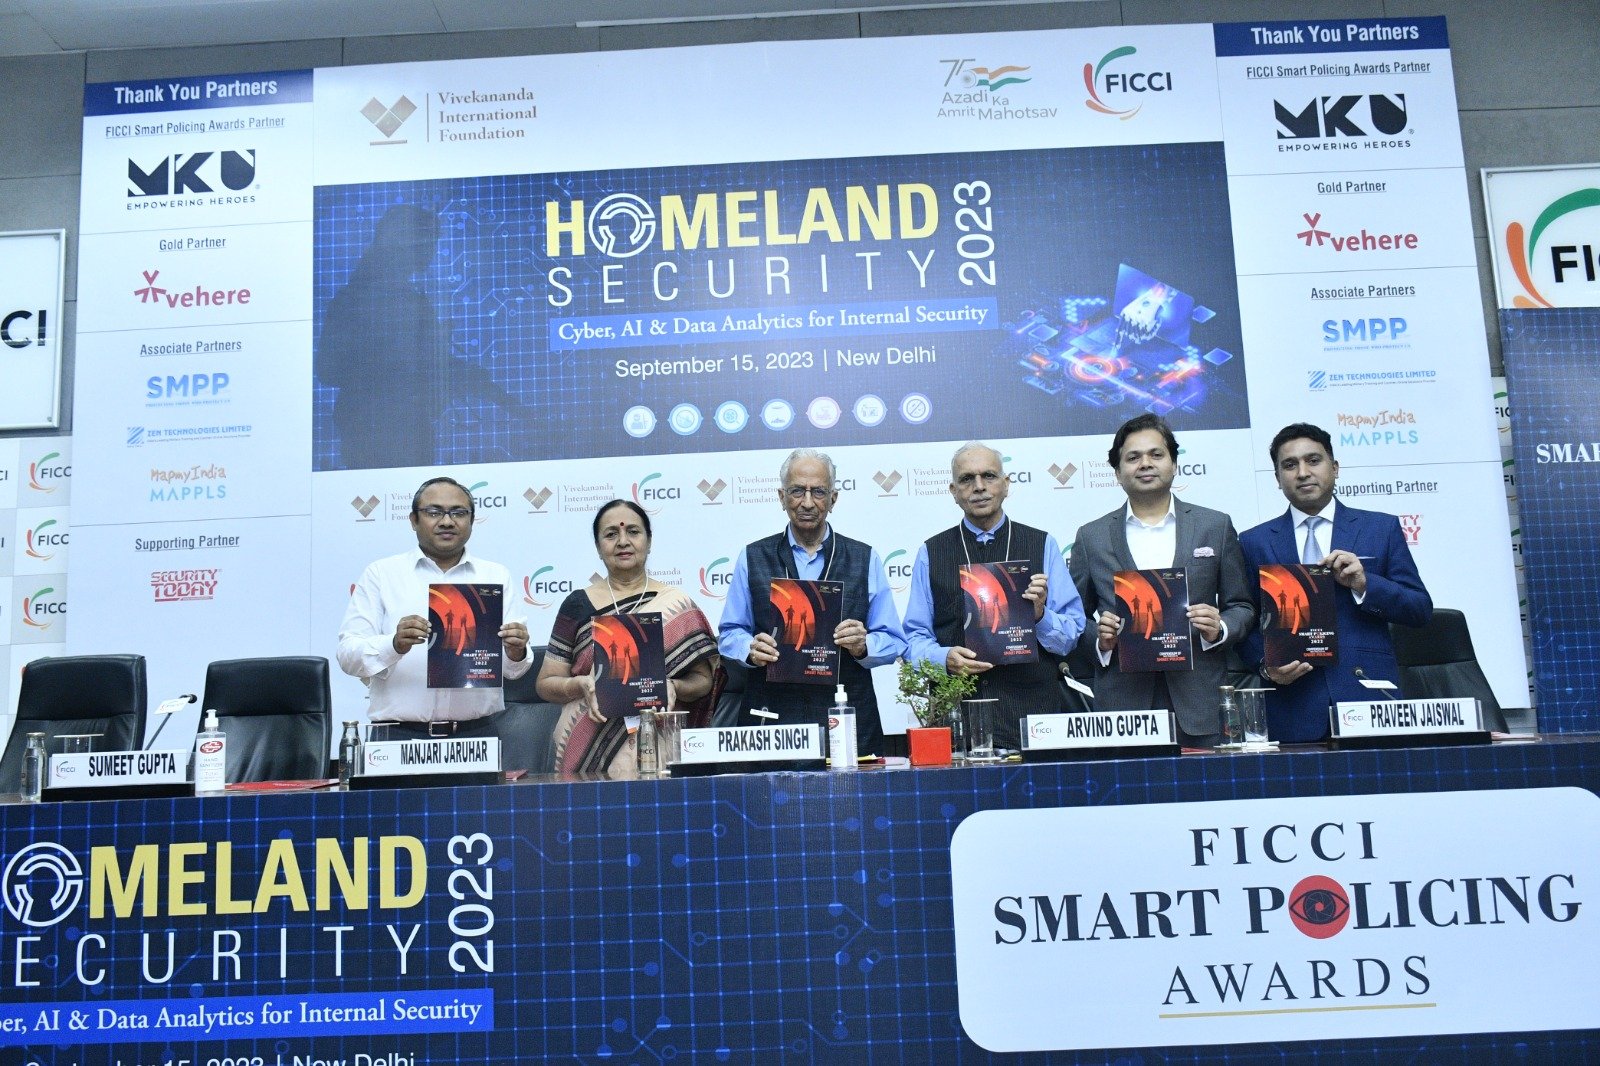 FICCI Homeland Security Conference 2023 